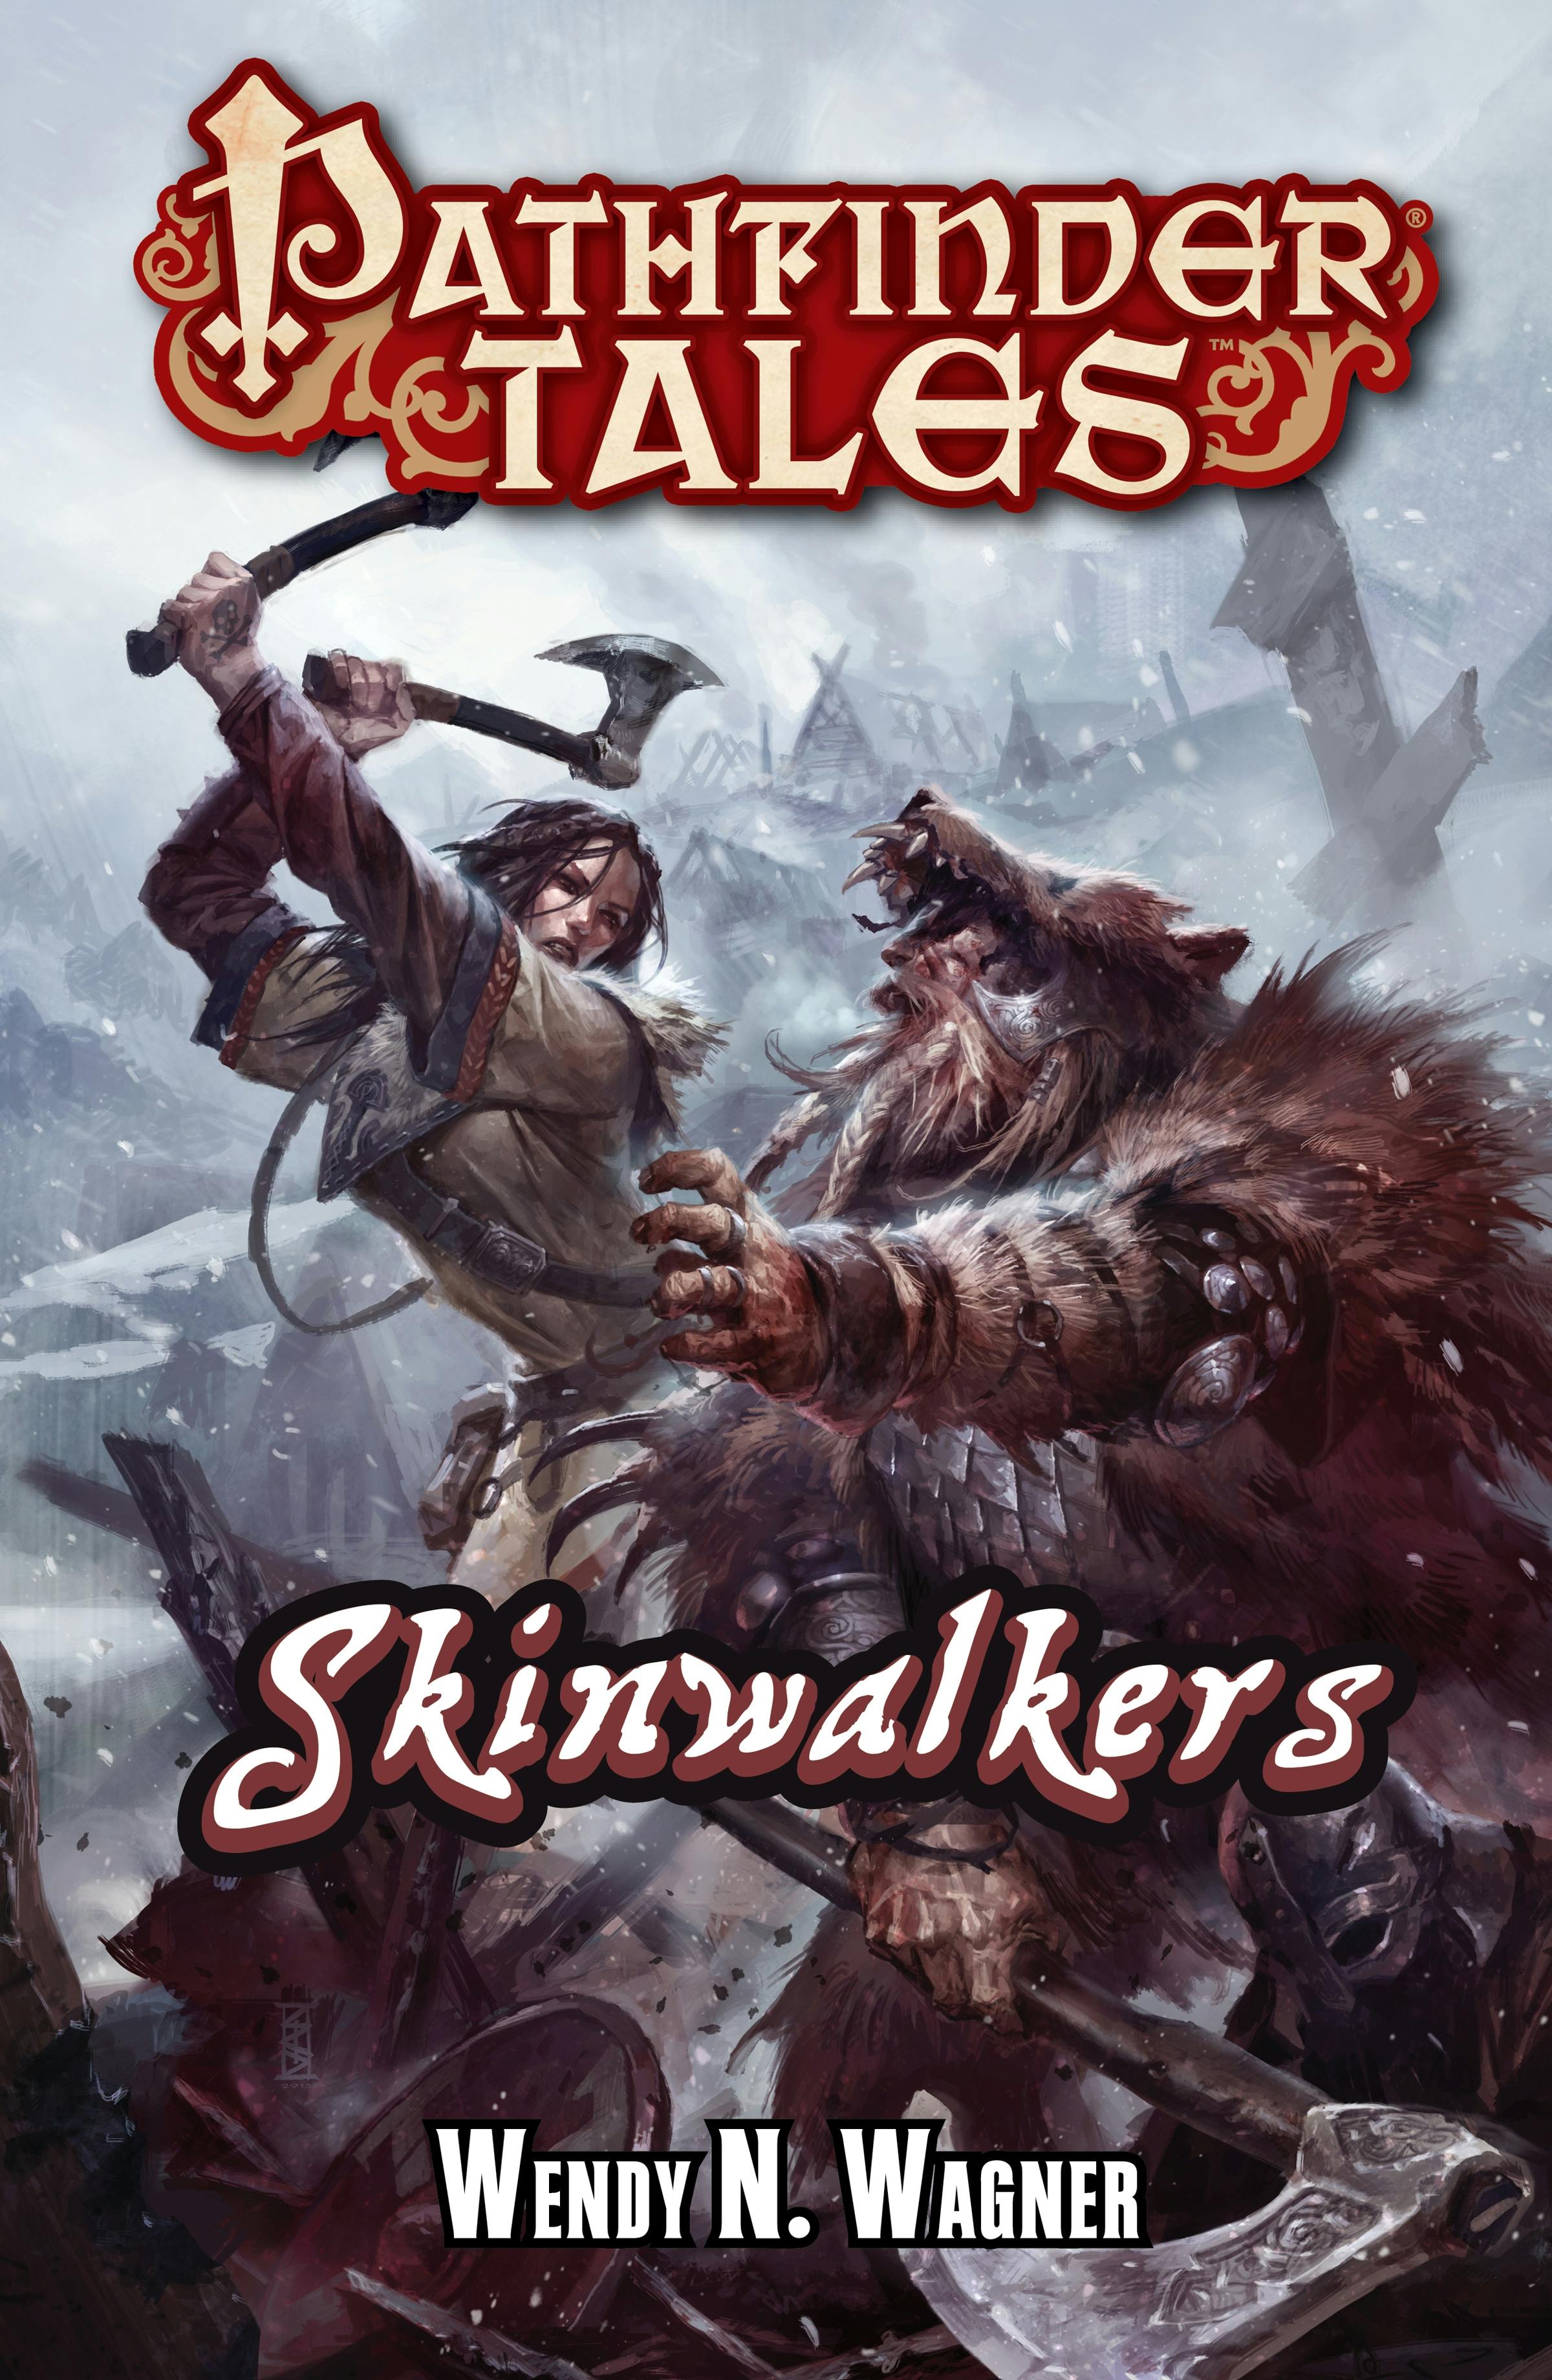 Cover for the book titled as: Pathfinder Tales: Skinwalkers